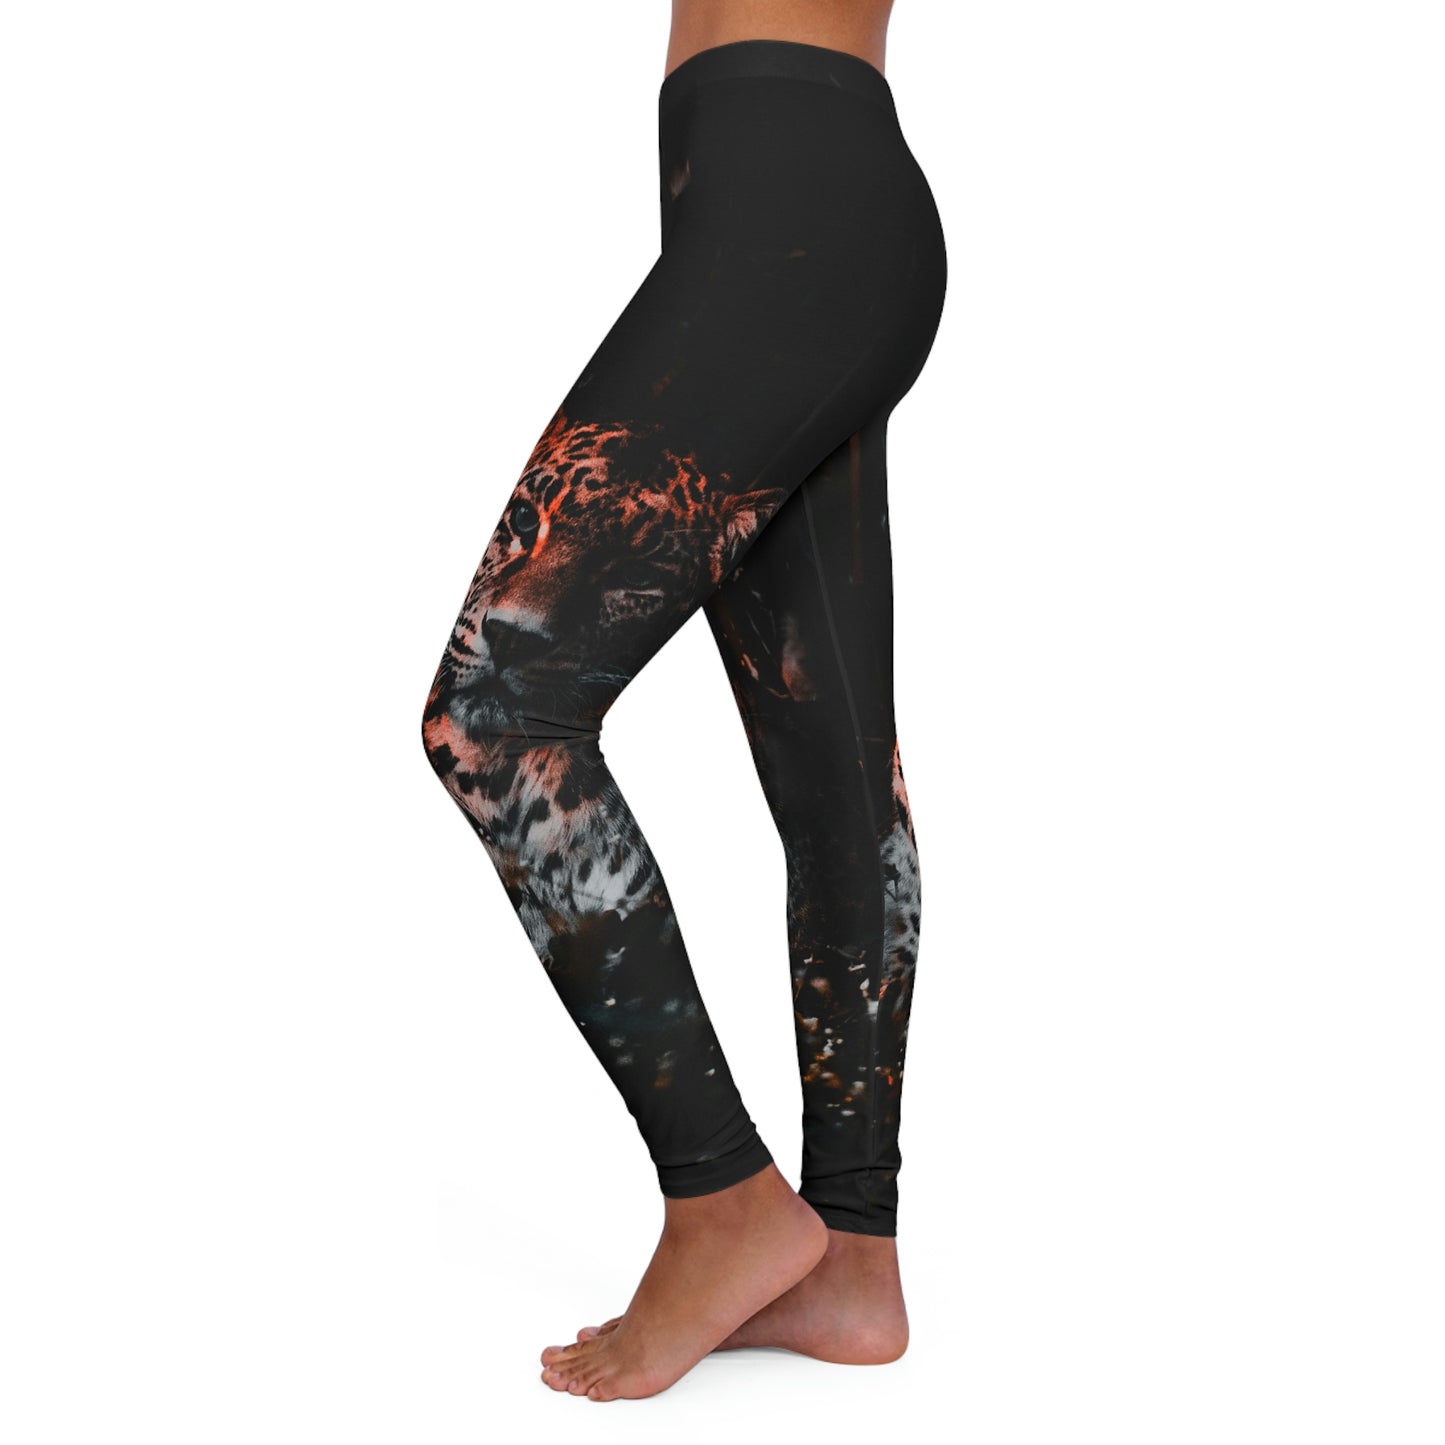 Women's Tiger Print Leggings, One of a Kind Gift - Workout Activewear  for Wife Fitness, Best Friend, mom and me tights Christmas Gift